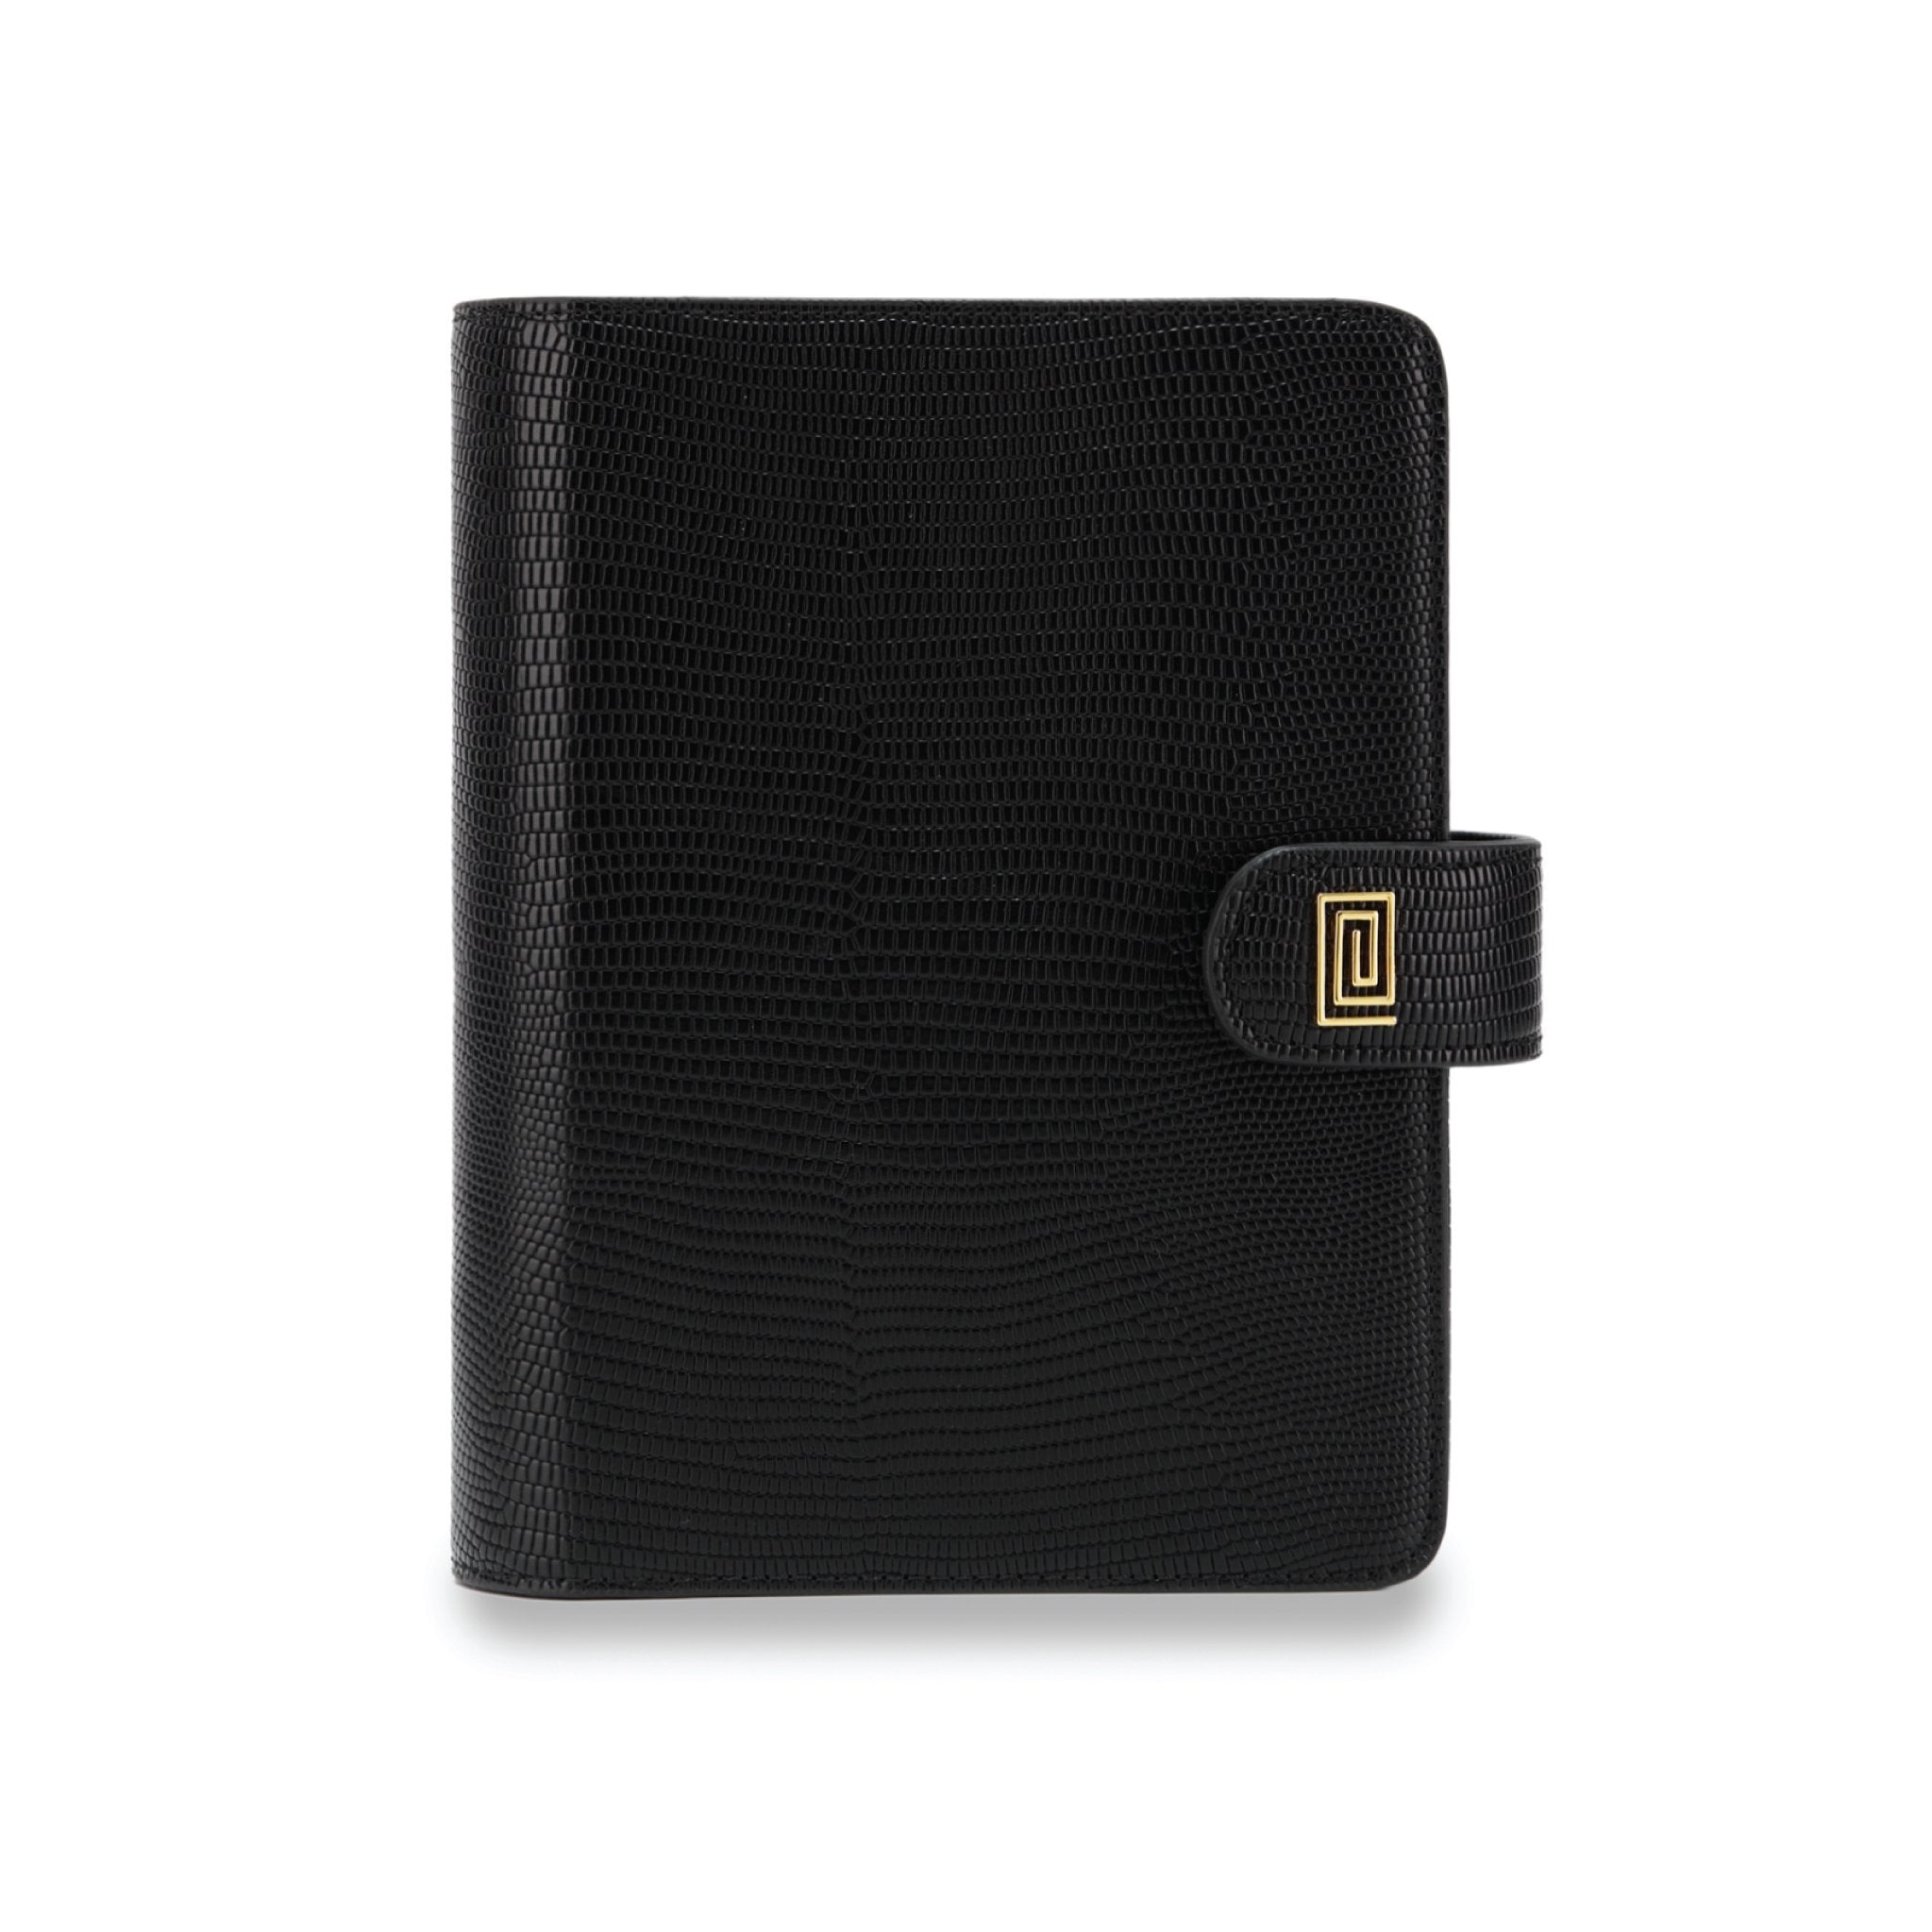 BLAQ Lizard Euro Ring | OUTLET | SS1. Euro Ring Agenda | A6 Planner Cover | Final Sale | NOTIQ